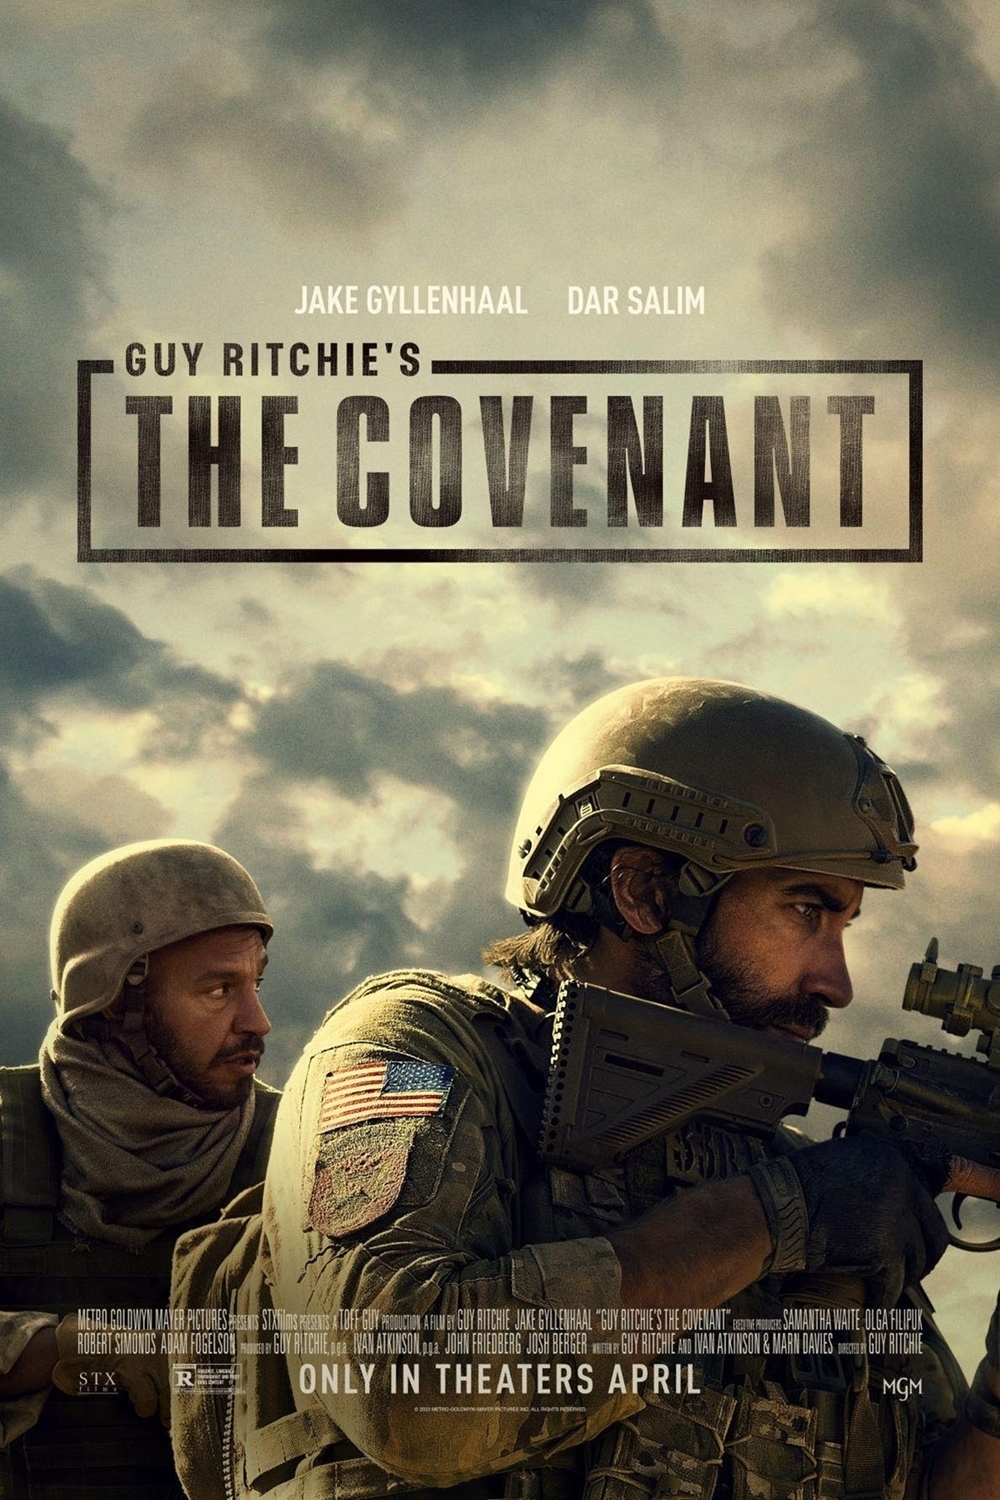 Guy Ritchie's The Covenant Poster